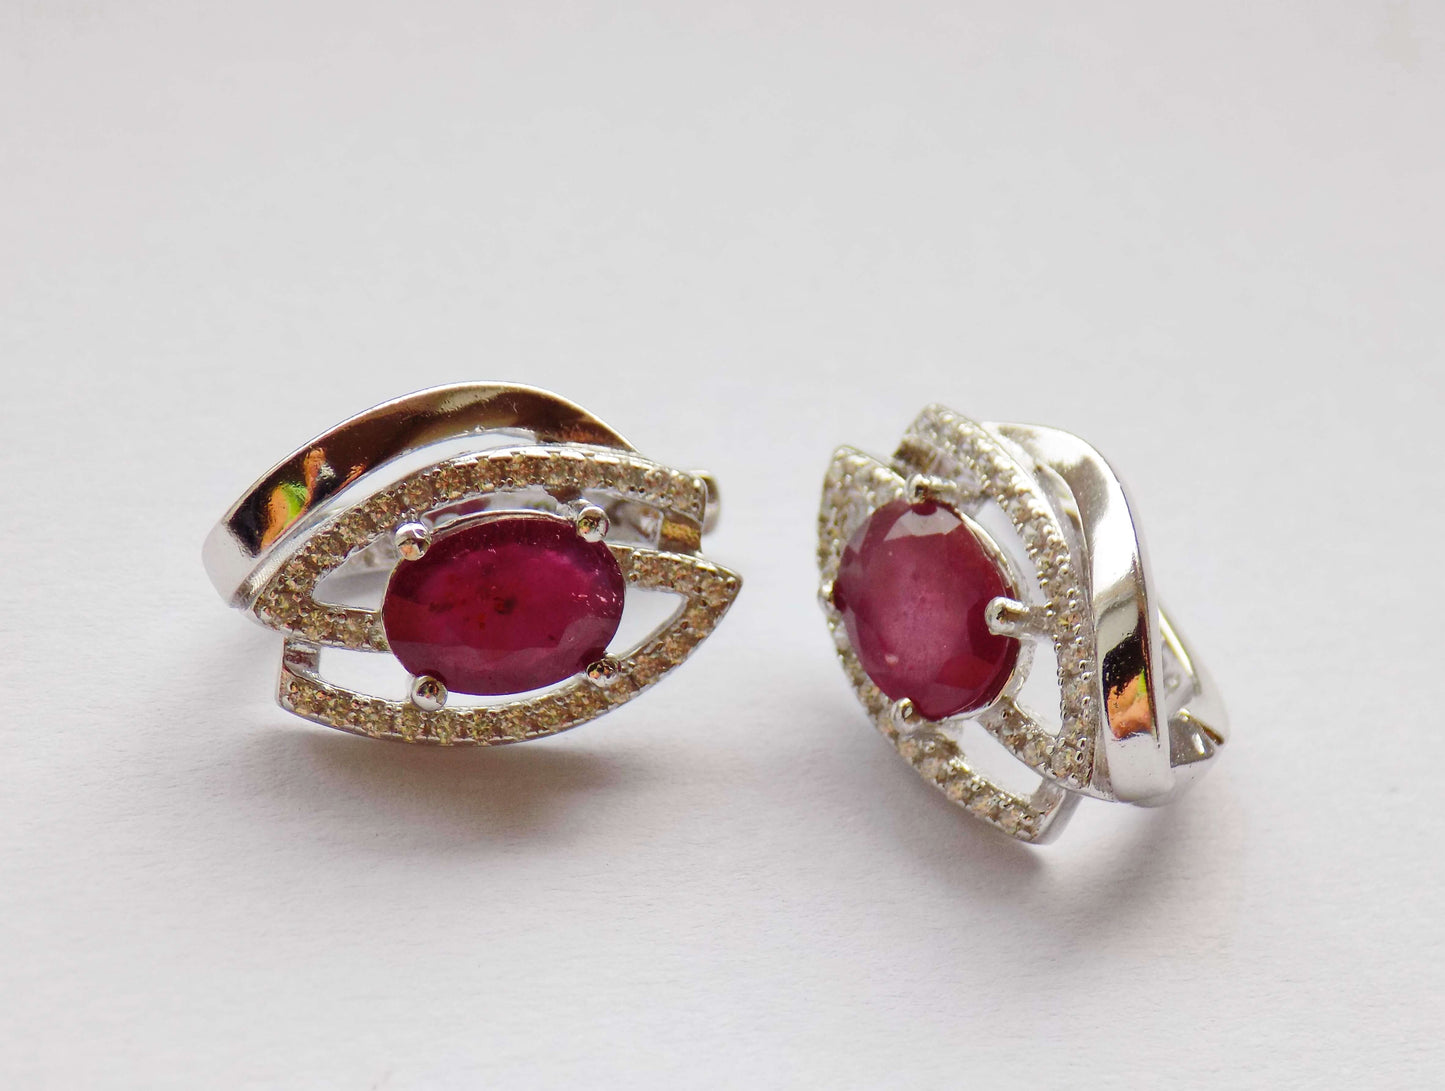 Silver Earrings with Rubies and Zircons - AnArt